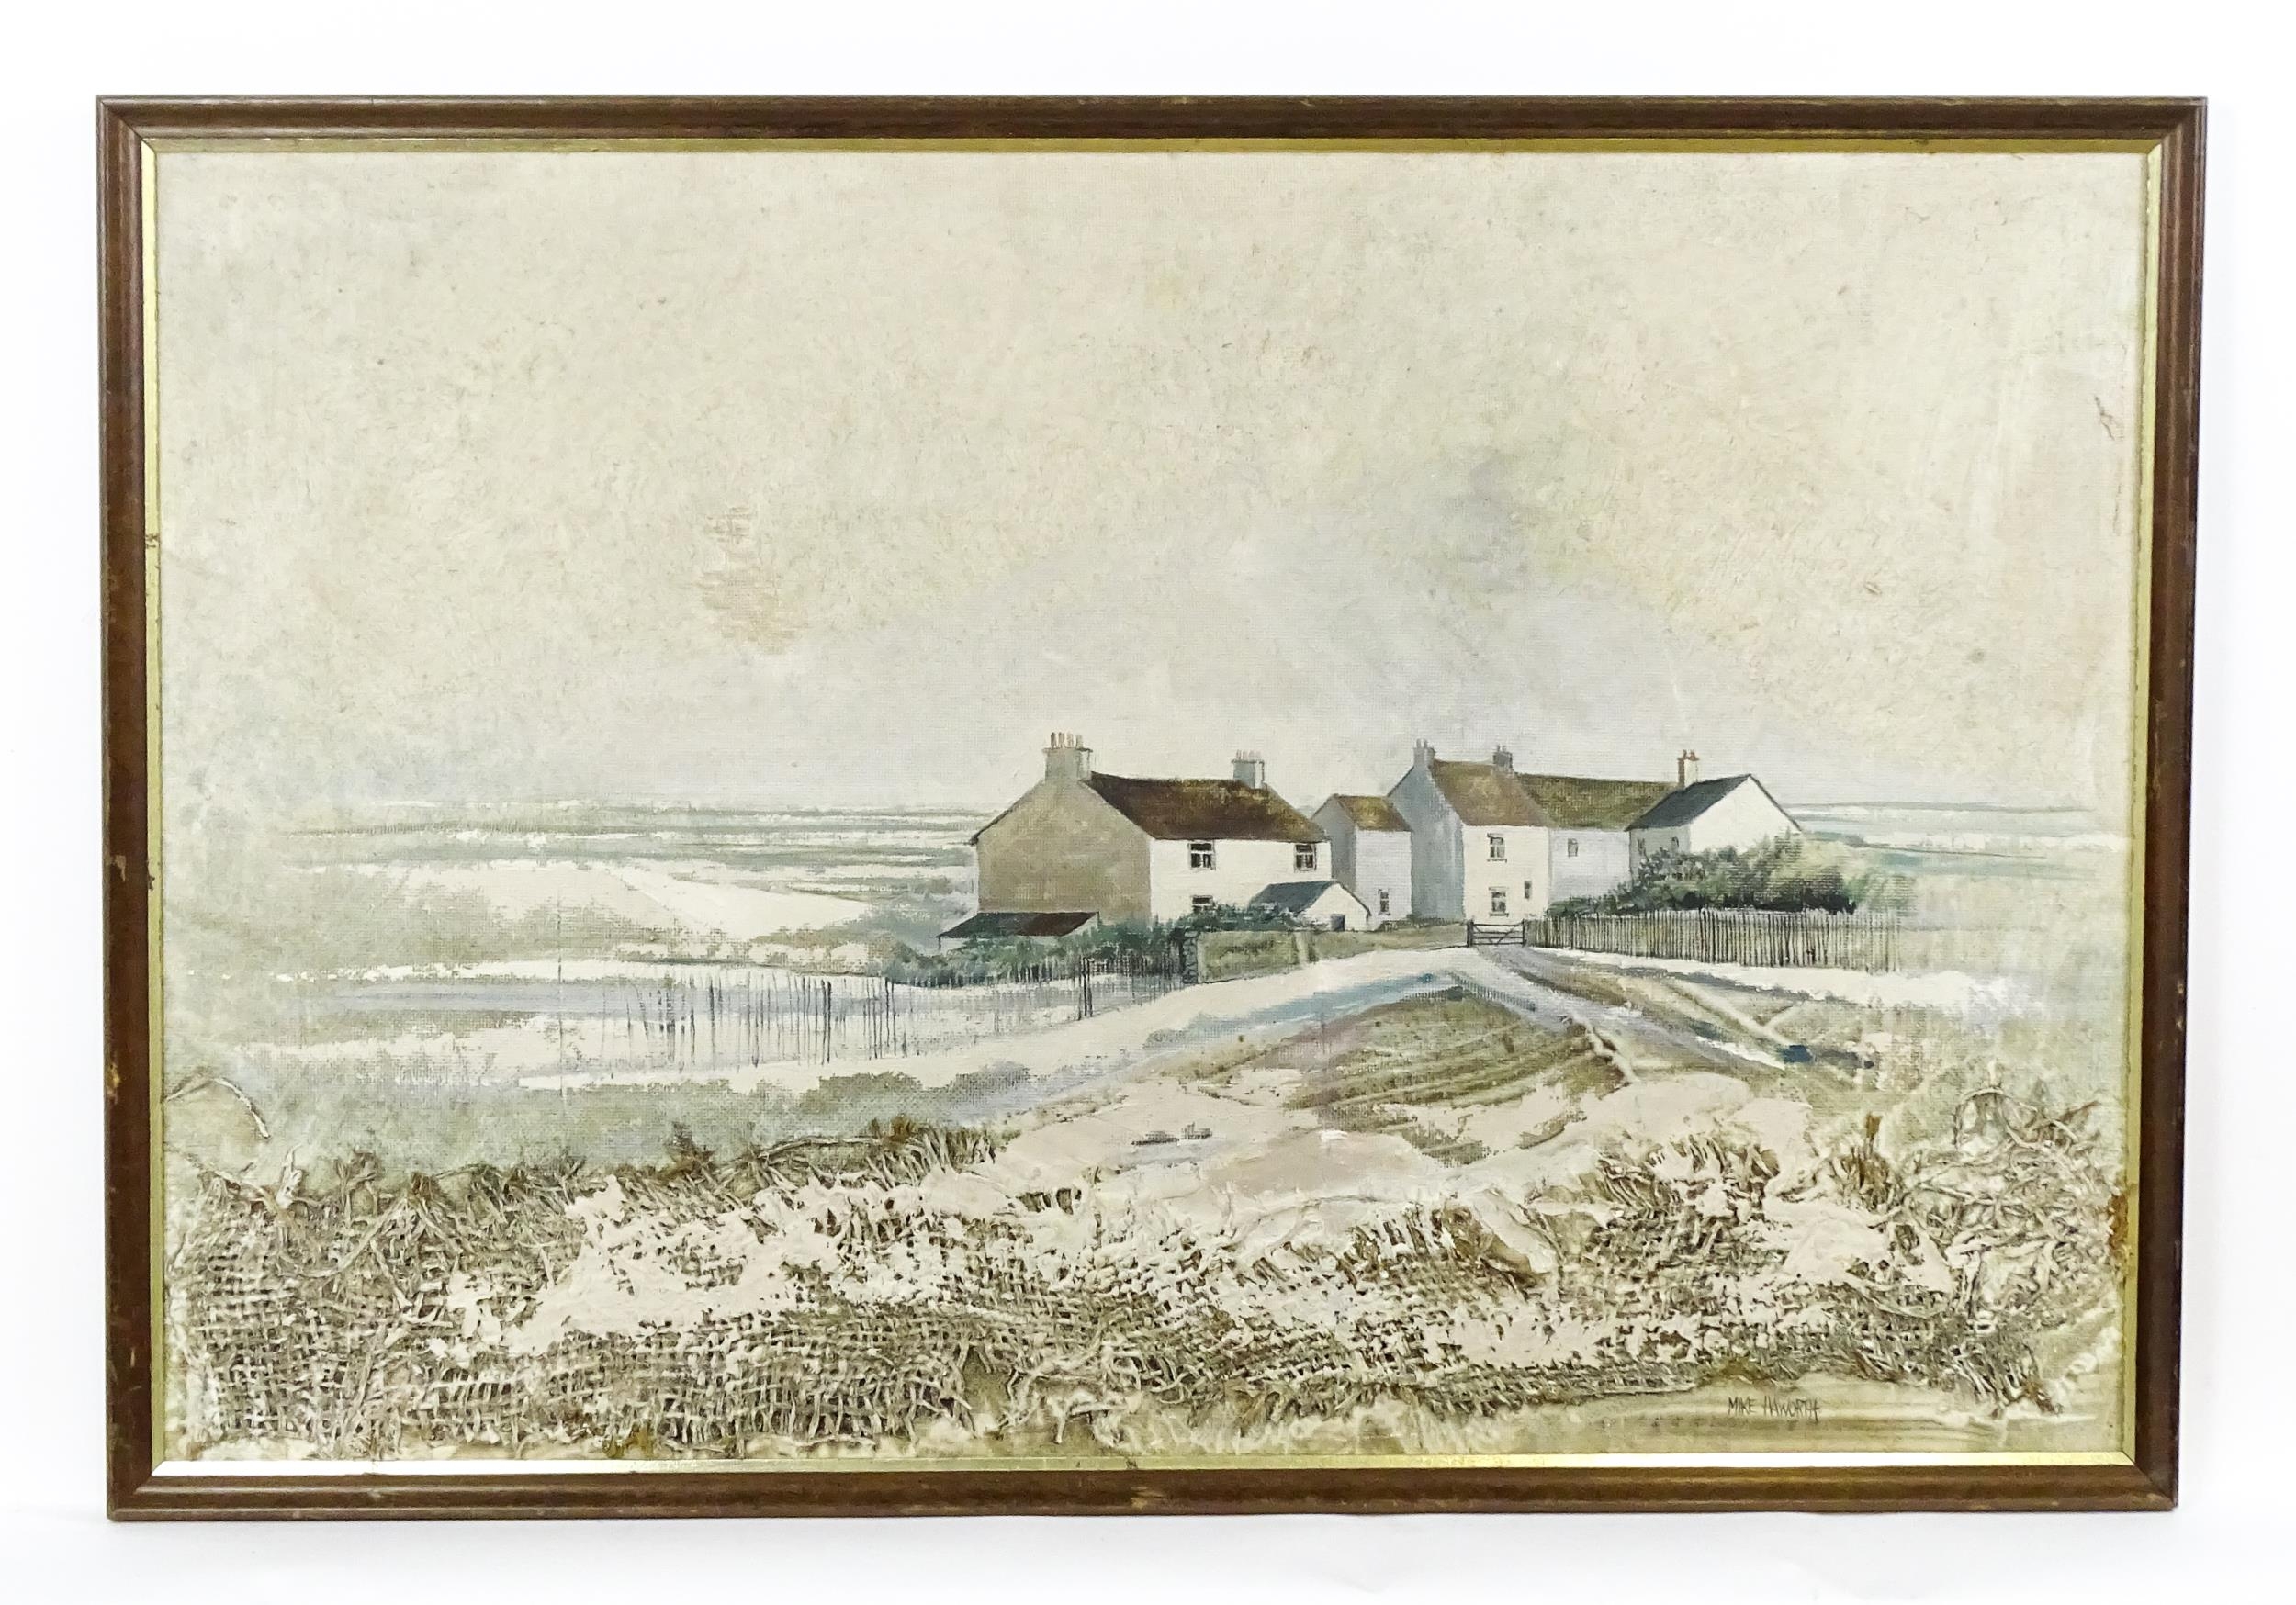 Mike Haworth, 20th century, Mixed media on board, A winter landscape with a view of a village.